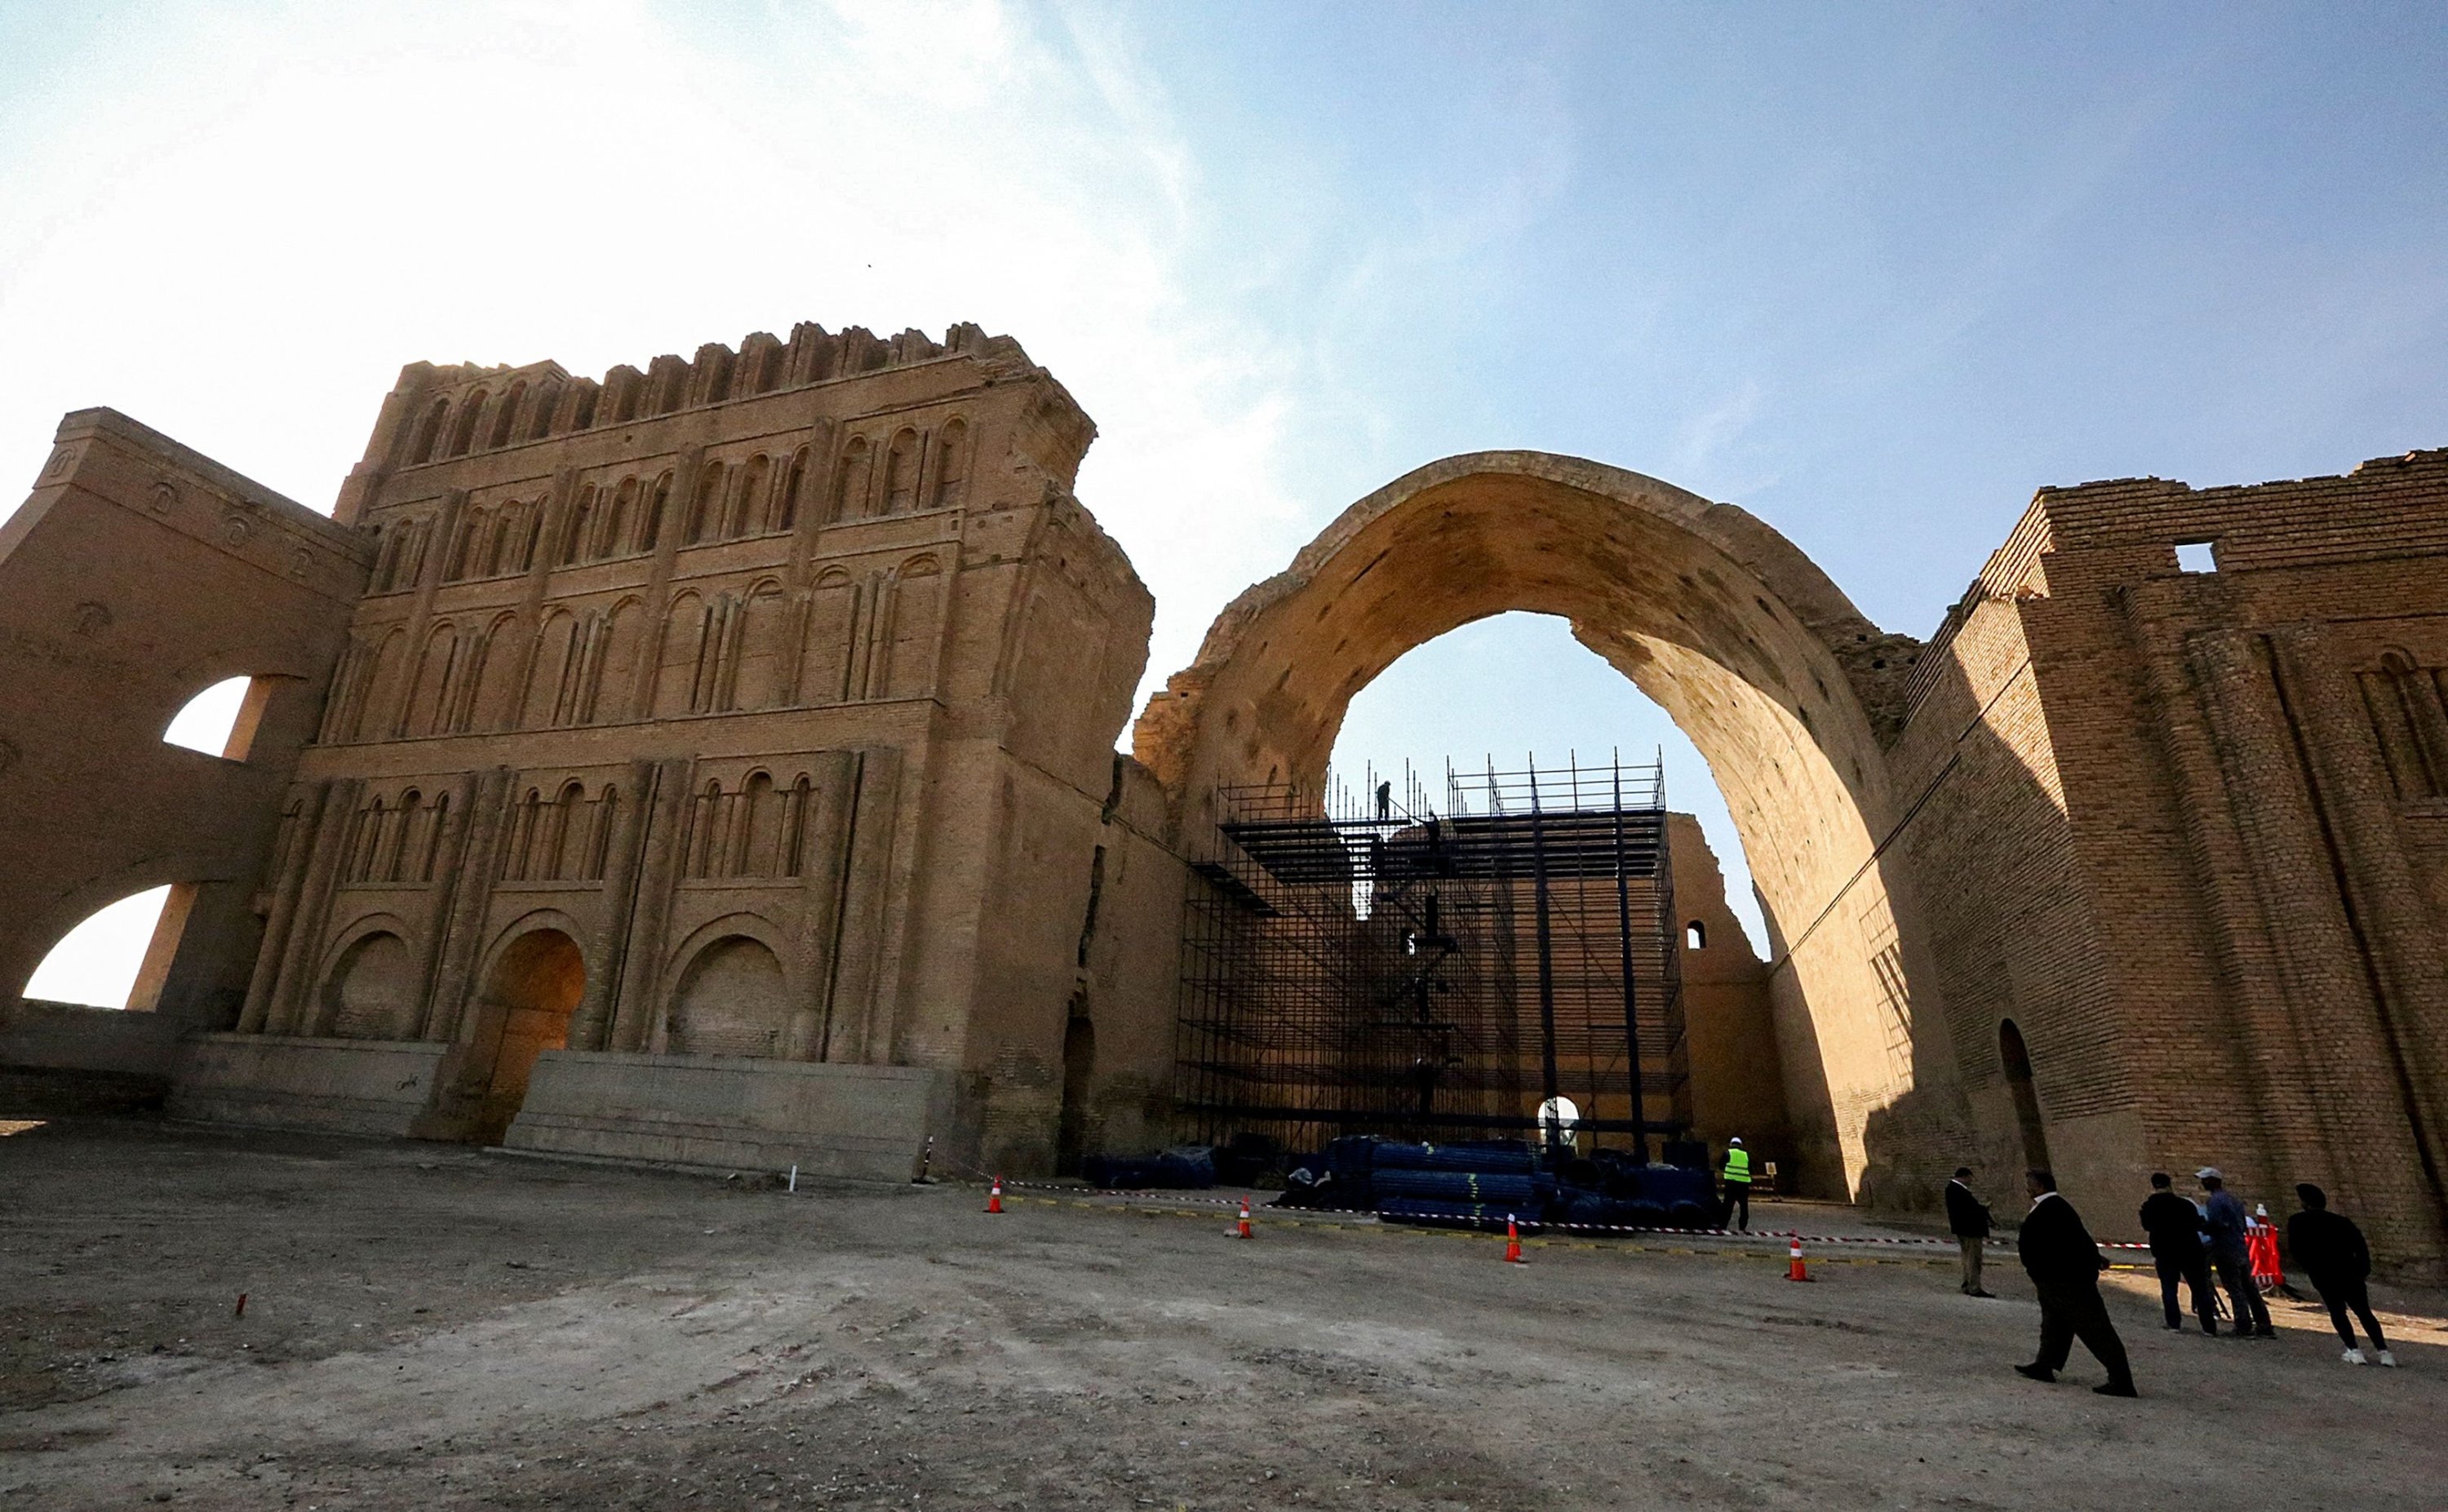 A general view of the Arch of Ctesiphon, also known as Taq Kisra (Khosrow's Arch), stands before the conservators' scaffolding at the ancient site of Ctesiphon near al-Madain, central Iraq, Nov. 24, 2021. (AFP Photo)